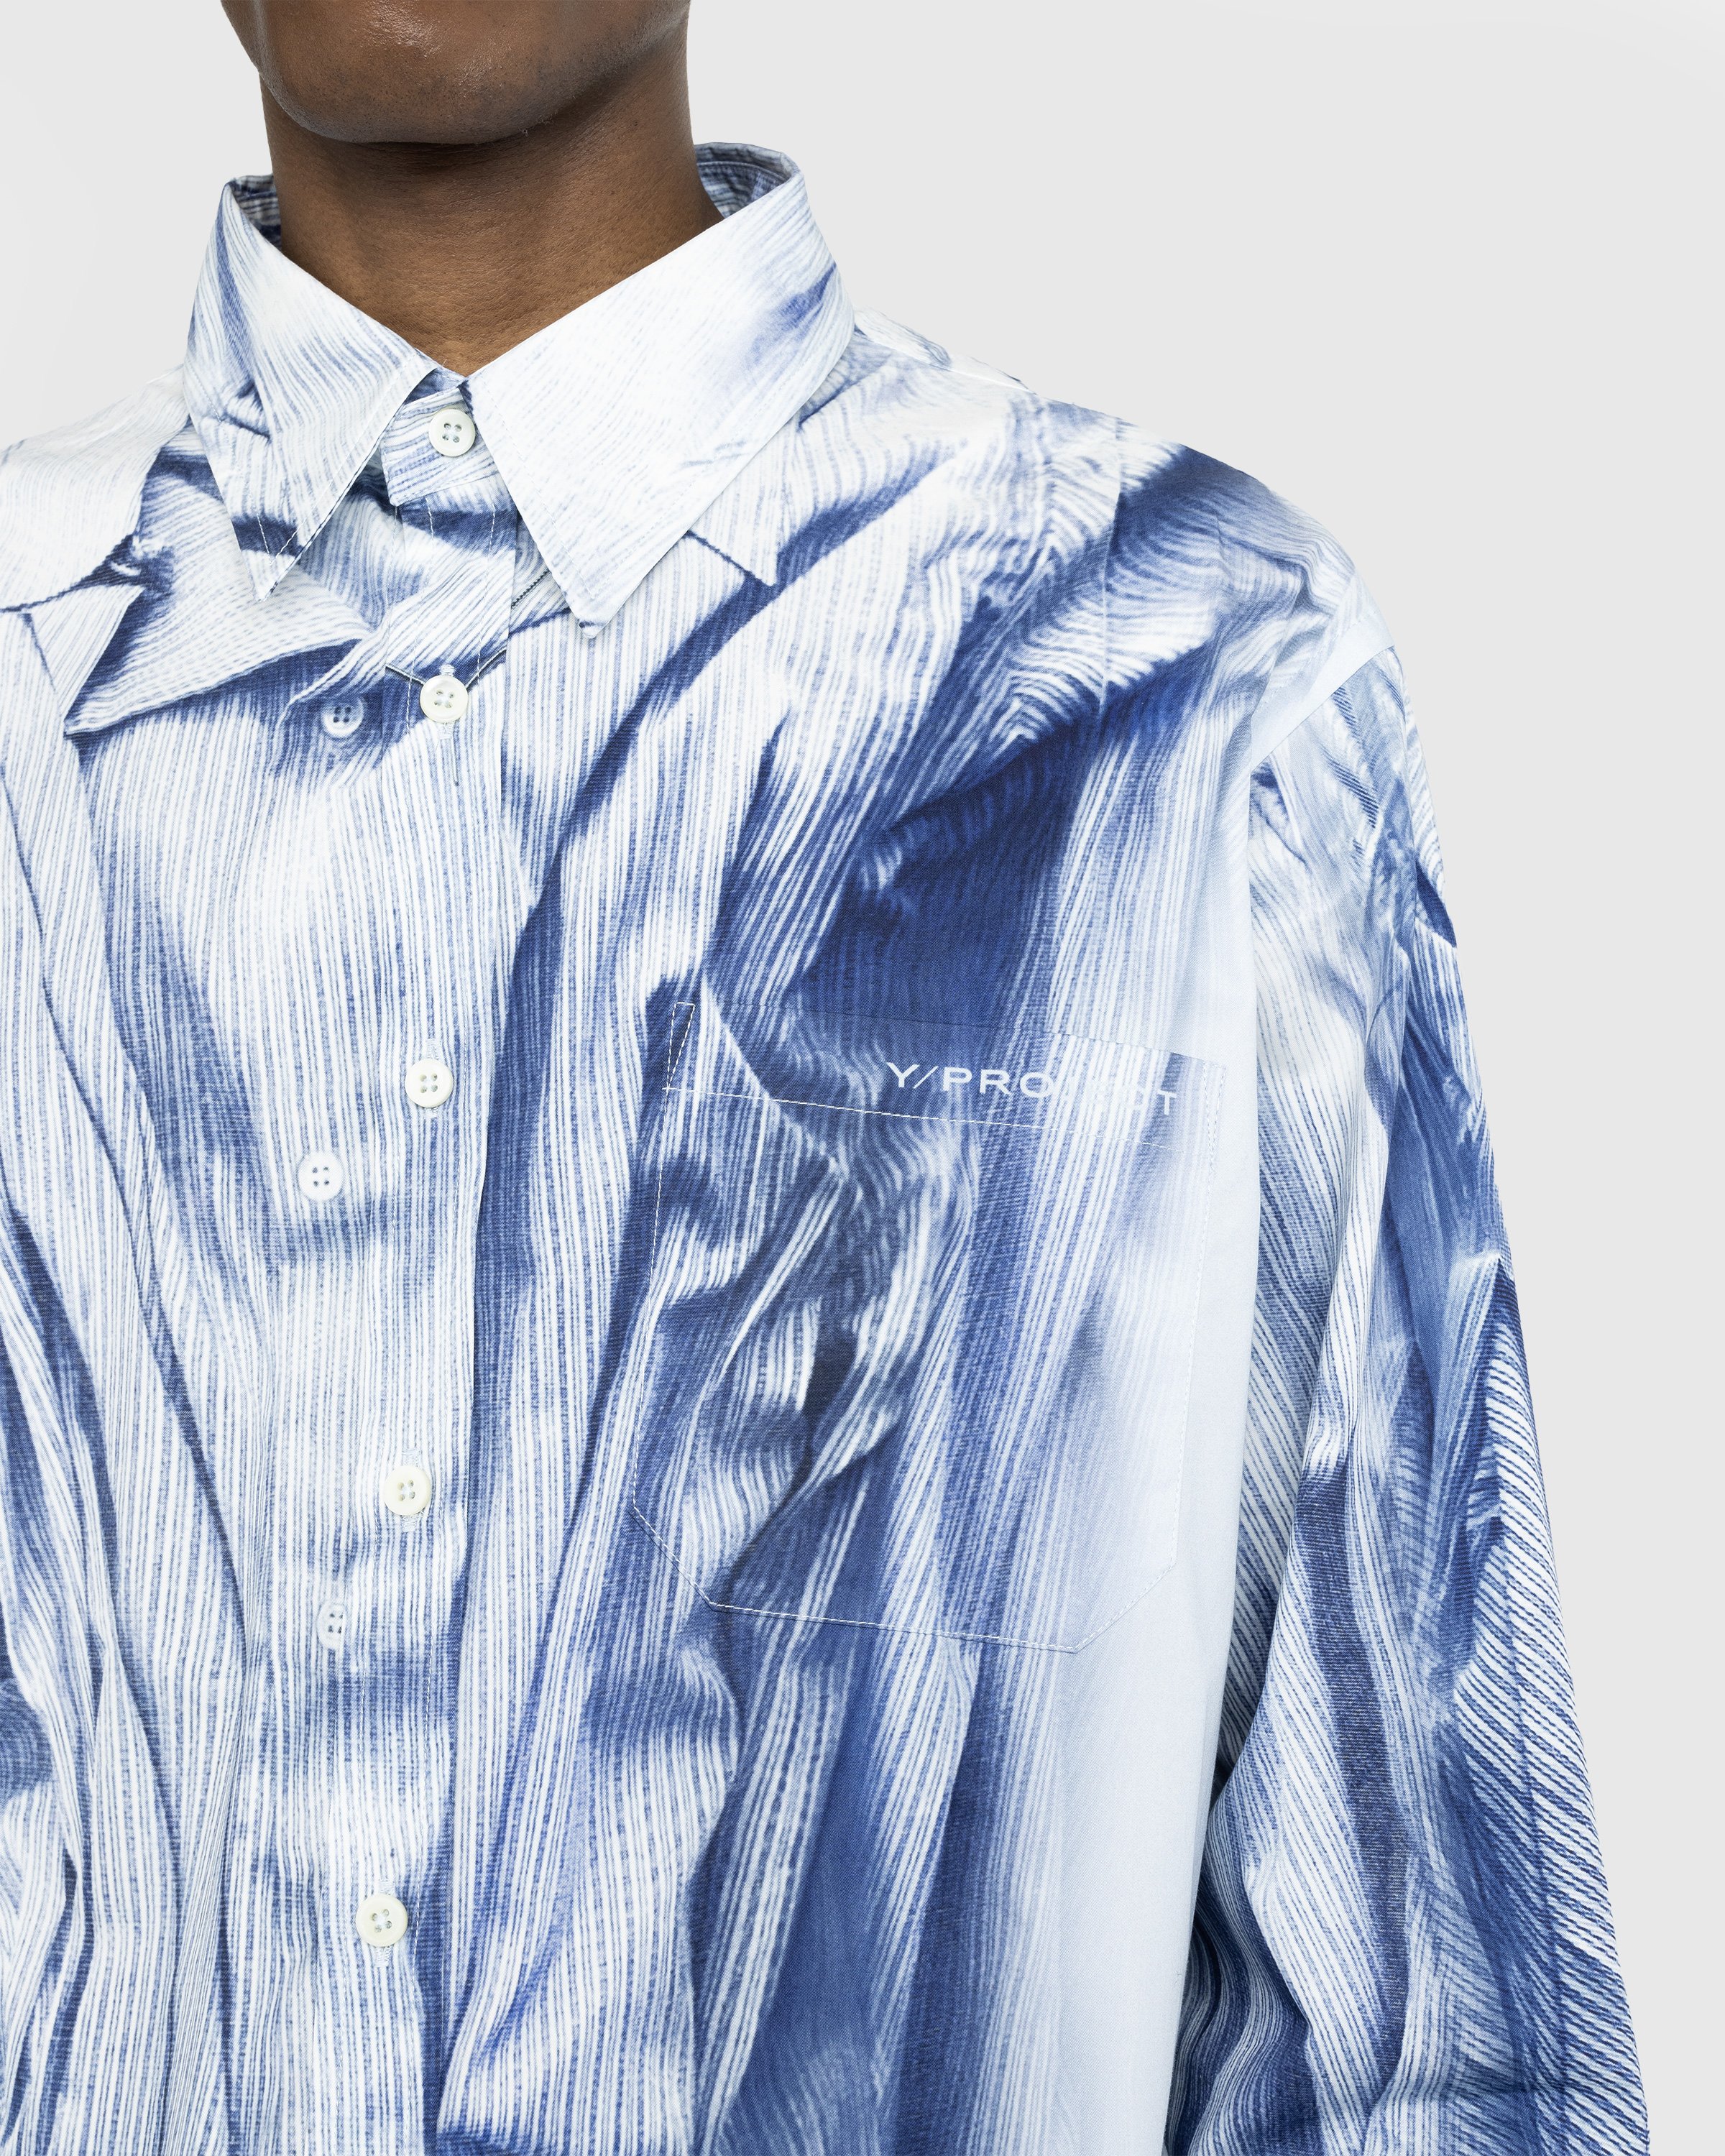 Y/Project - COMPACT PRINT SHIRT - Clothing - Blue - Image 5